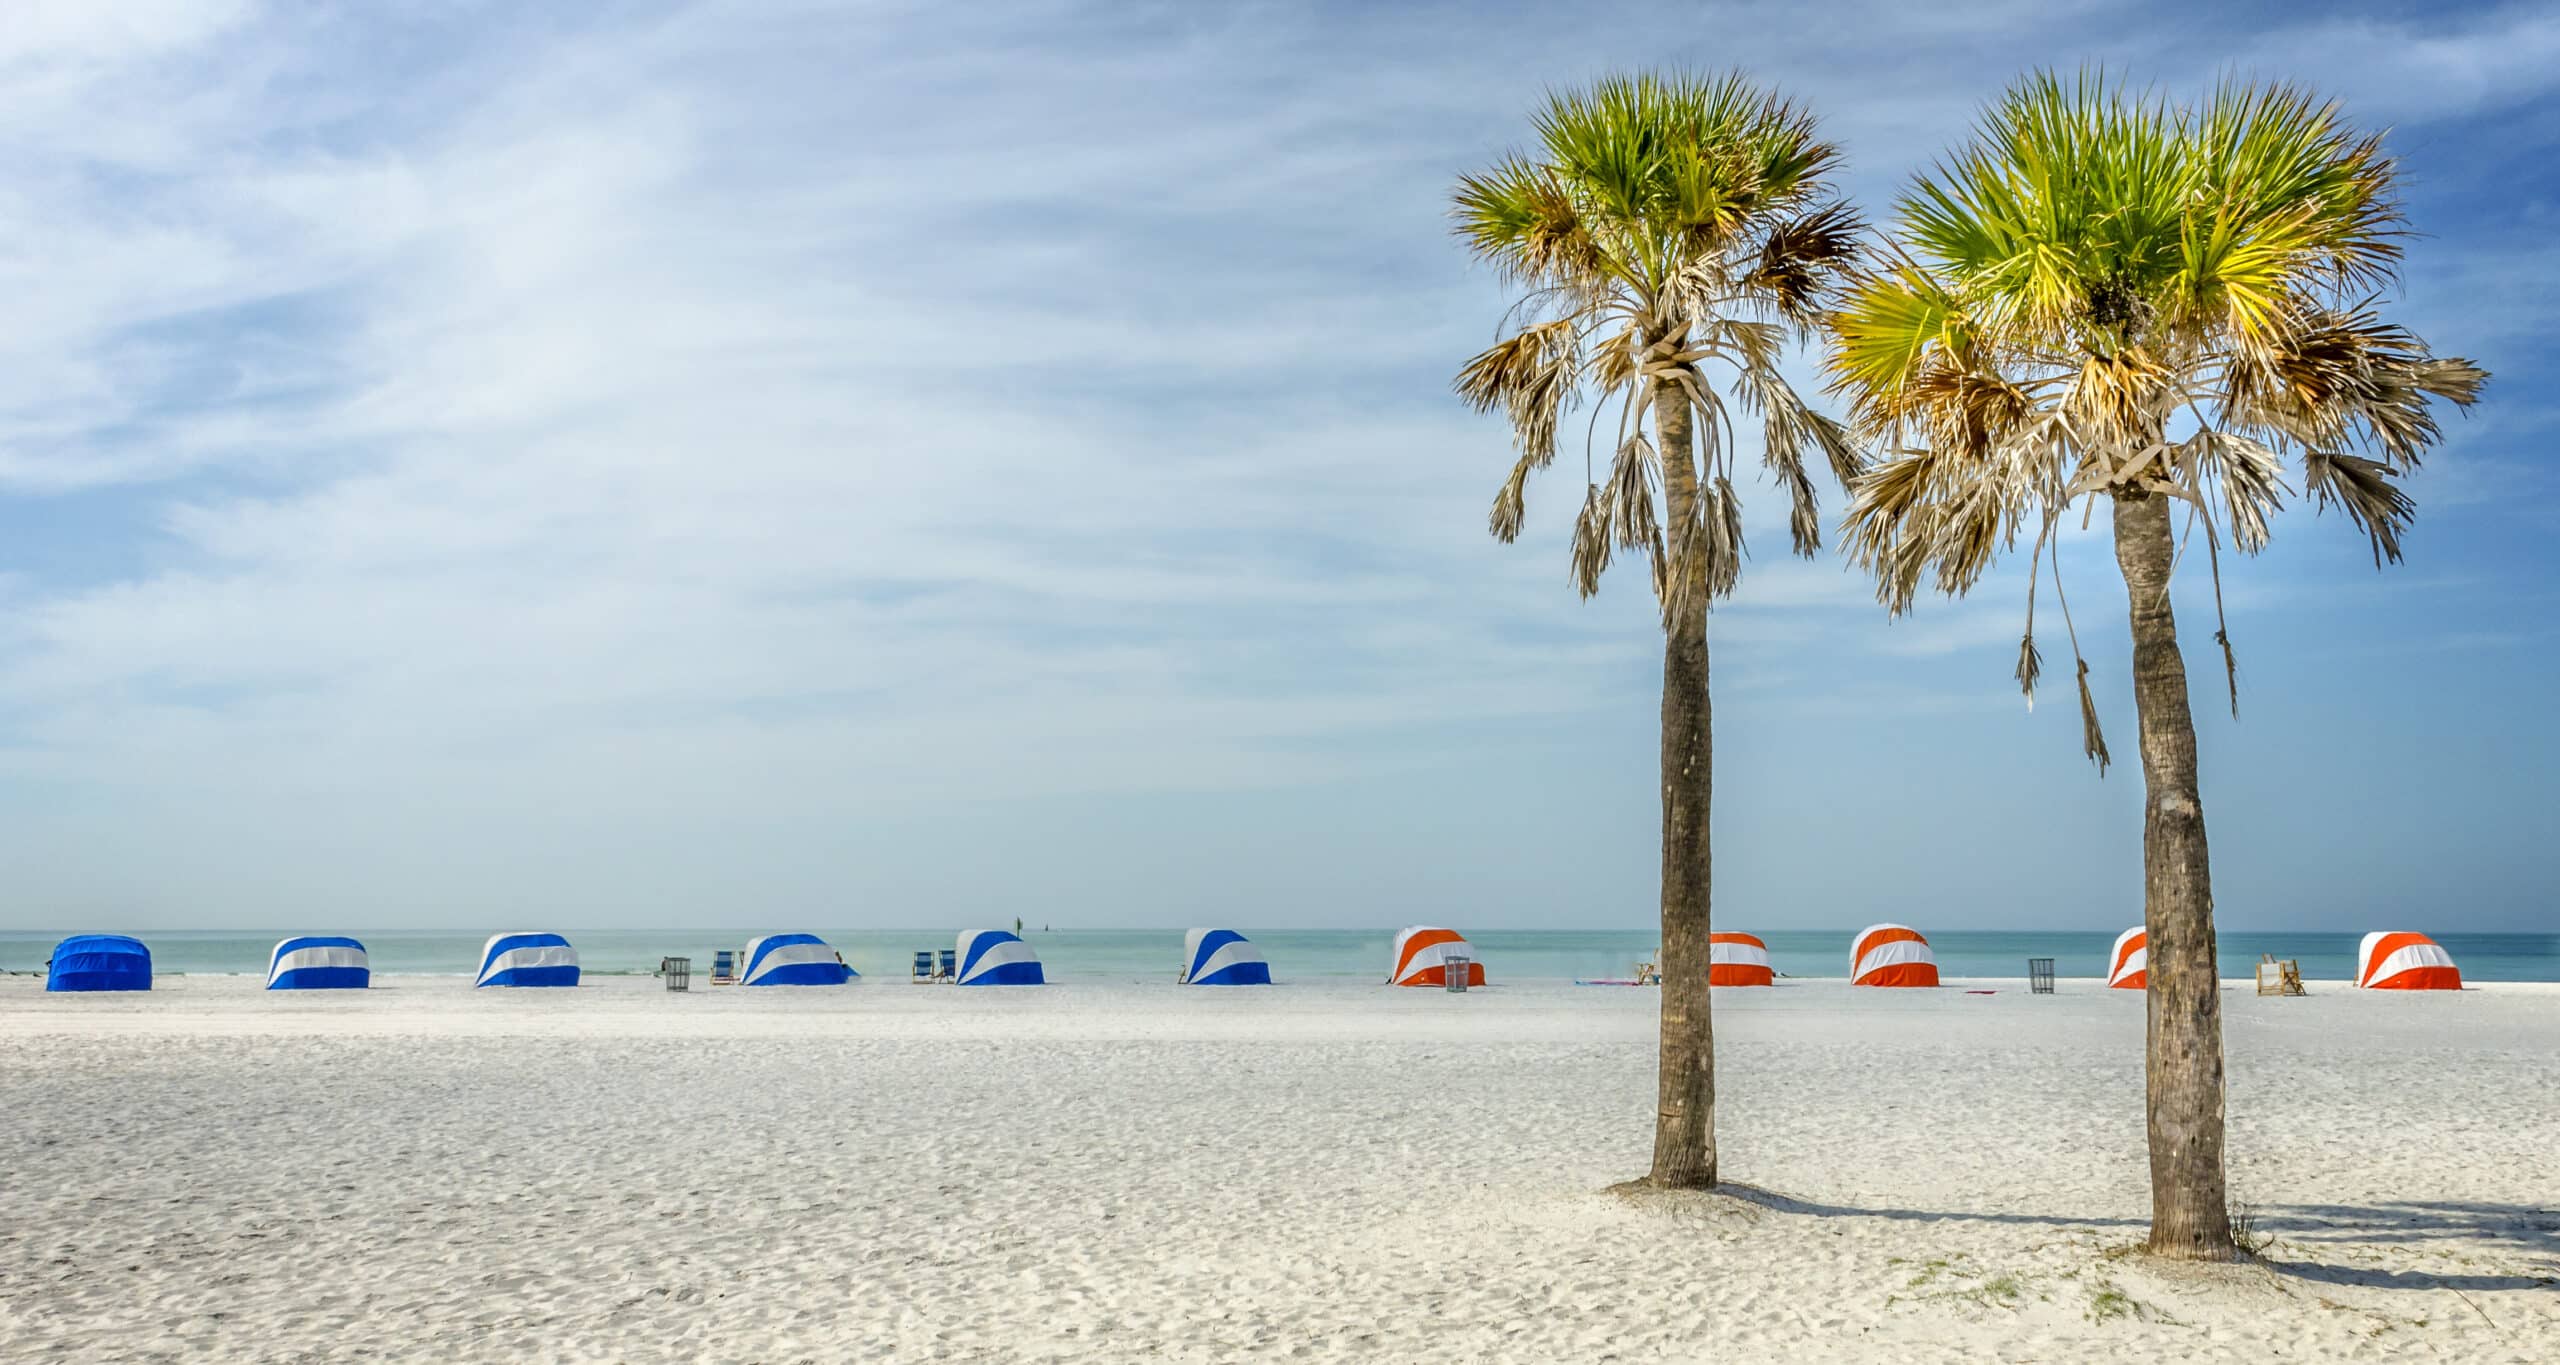 Two palm trees on white sand beach with striped beach cabanas on the edge of the beach in Clearwater, Florida one of the top destinations for best Florida resorts for couples